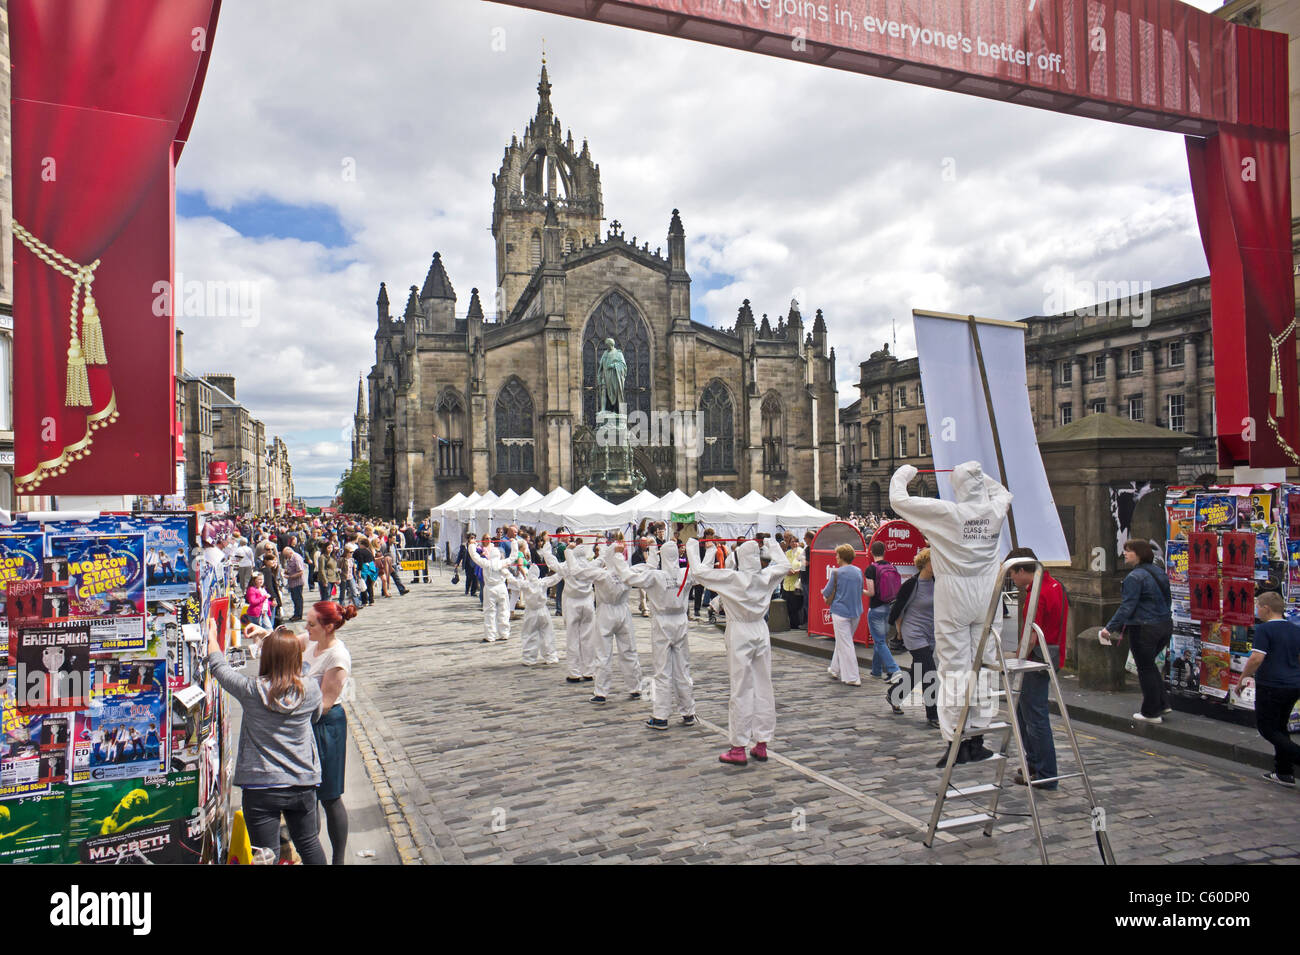 The West entrance to the Royal Mile Edinburgh Fringe Festival area with displays tents and shows with St. Giles Cathedral behind Stock Photo